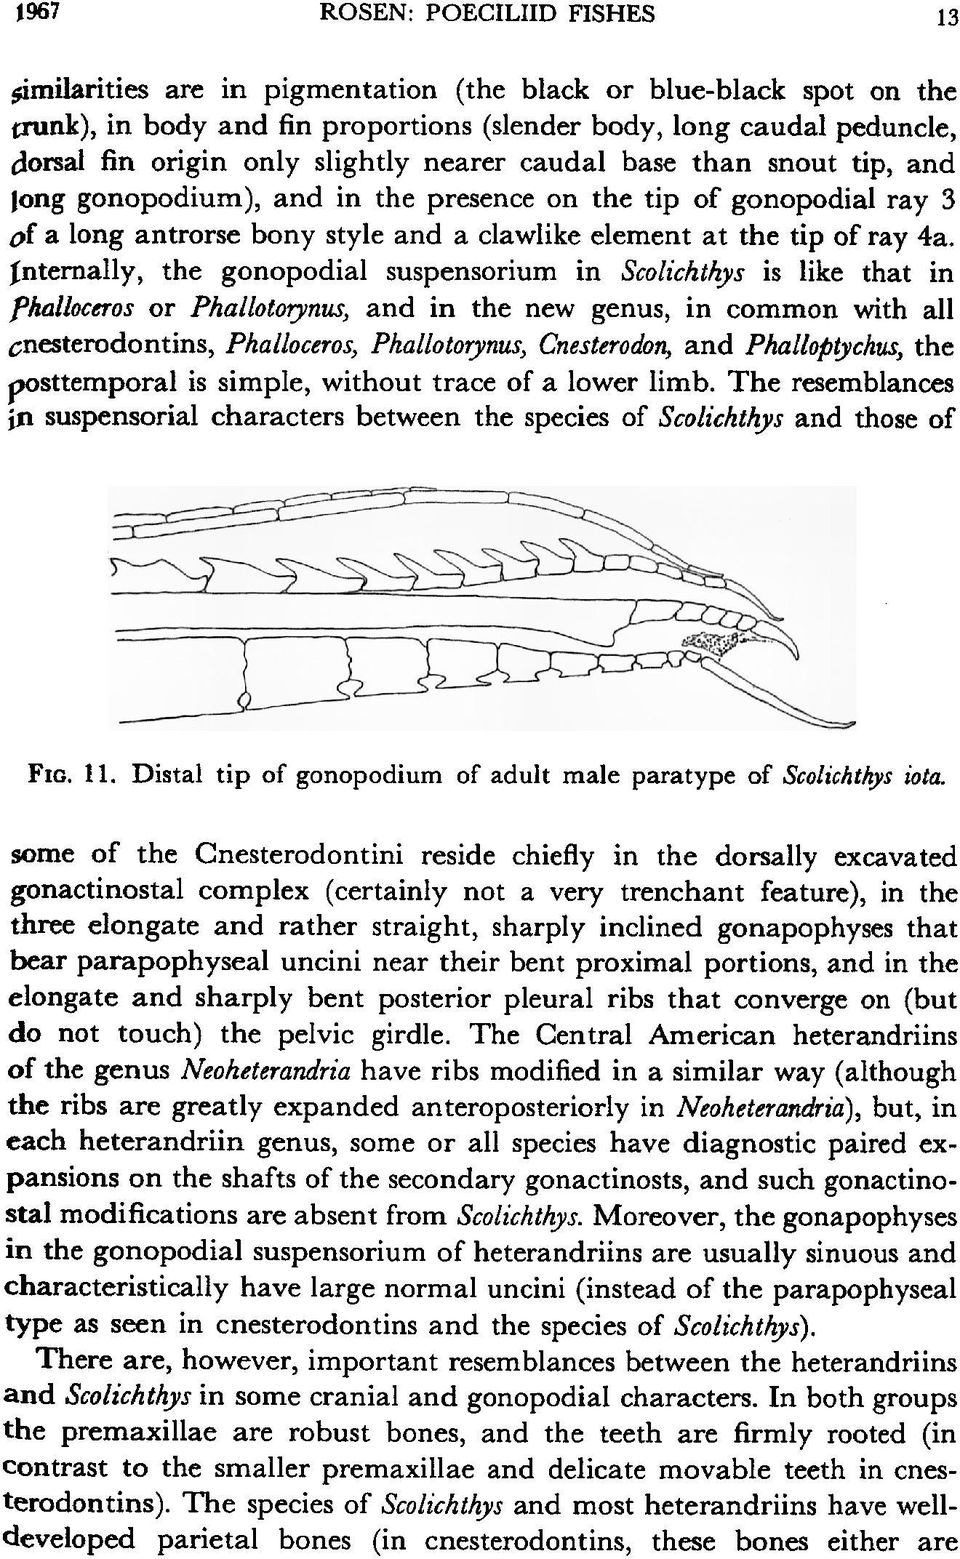 Internally, the gonopodial suspensorium in Scolichthys is like that in phalloceros or Phallotoiynus, and in the new genus, in common with all cnesterodontins, Phalloceros, Phallotorynus, Cnesterodon,